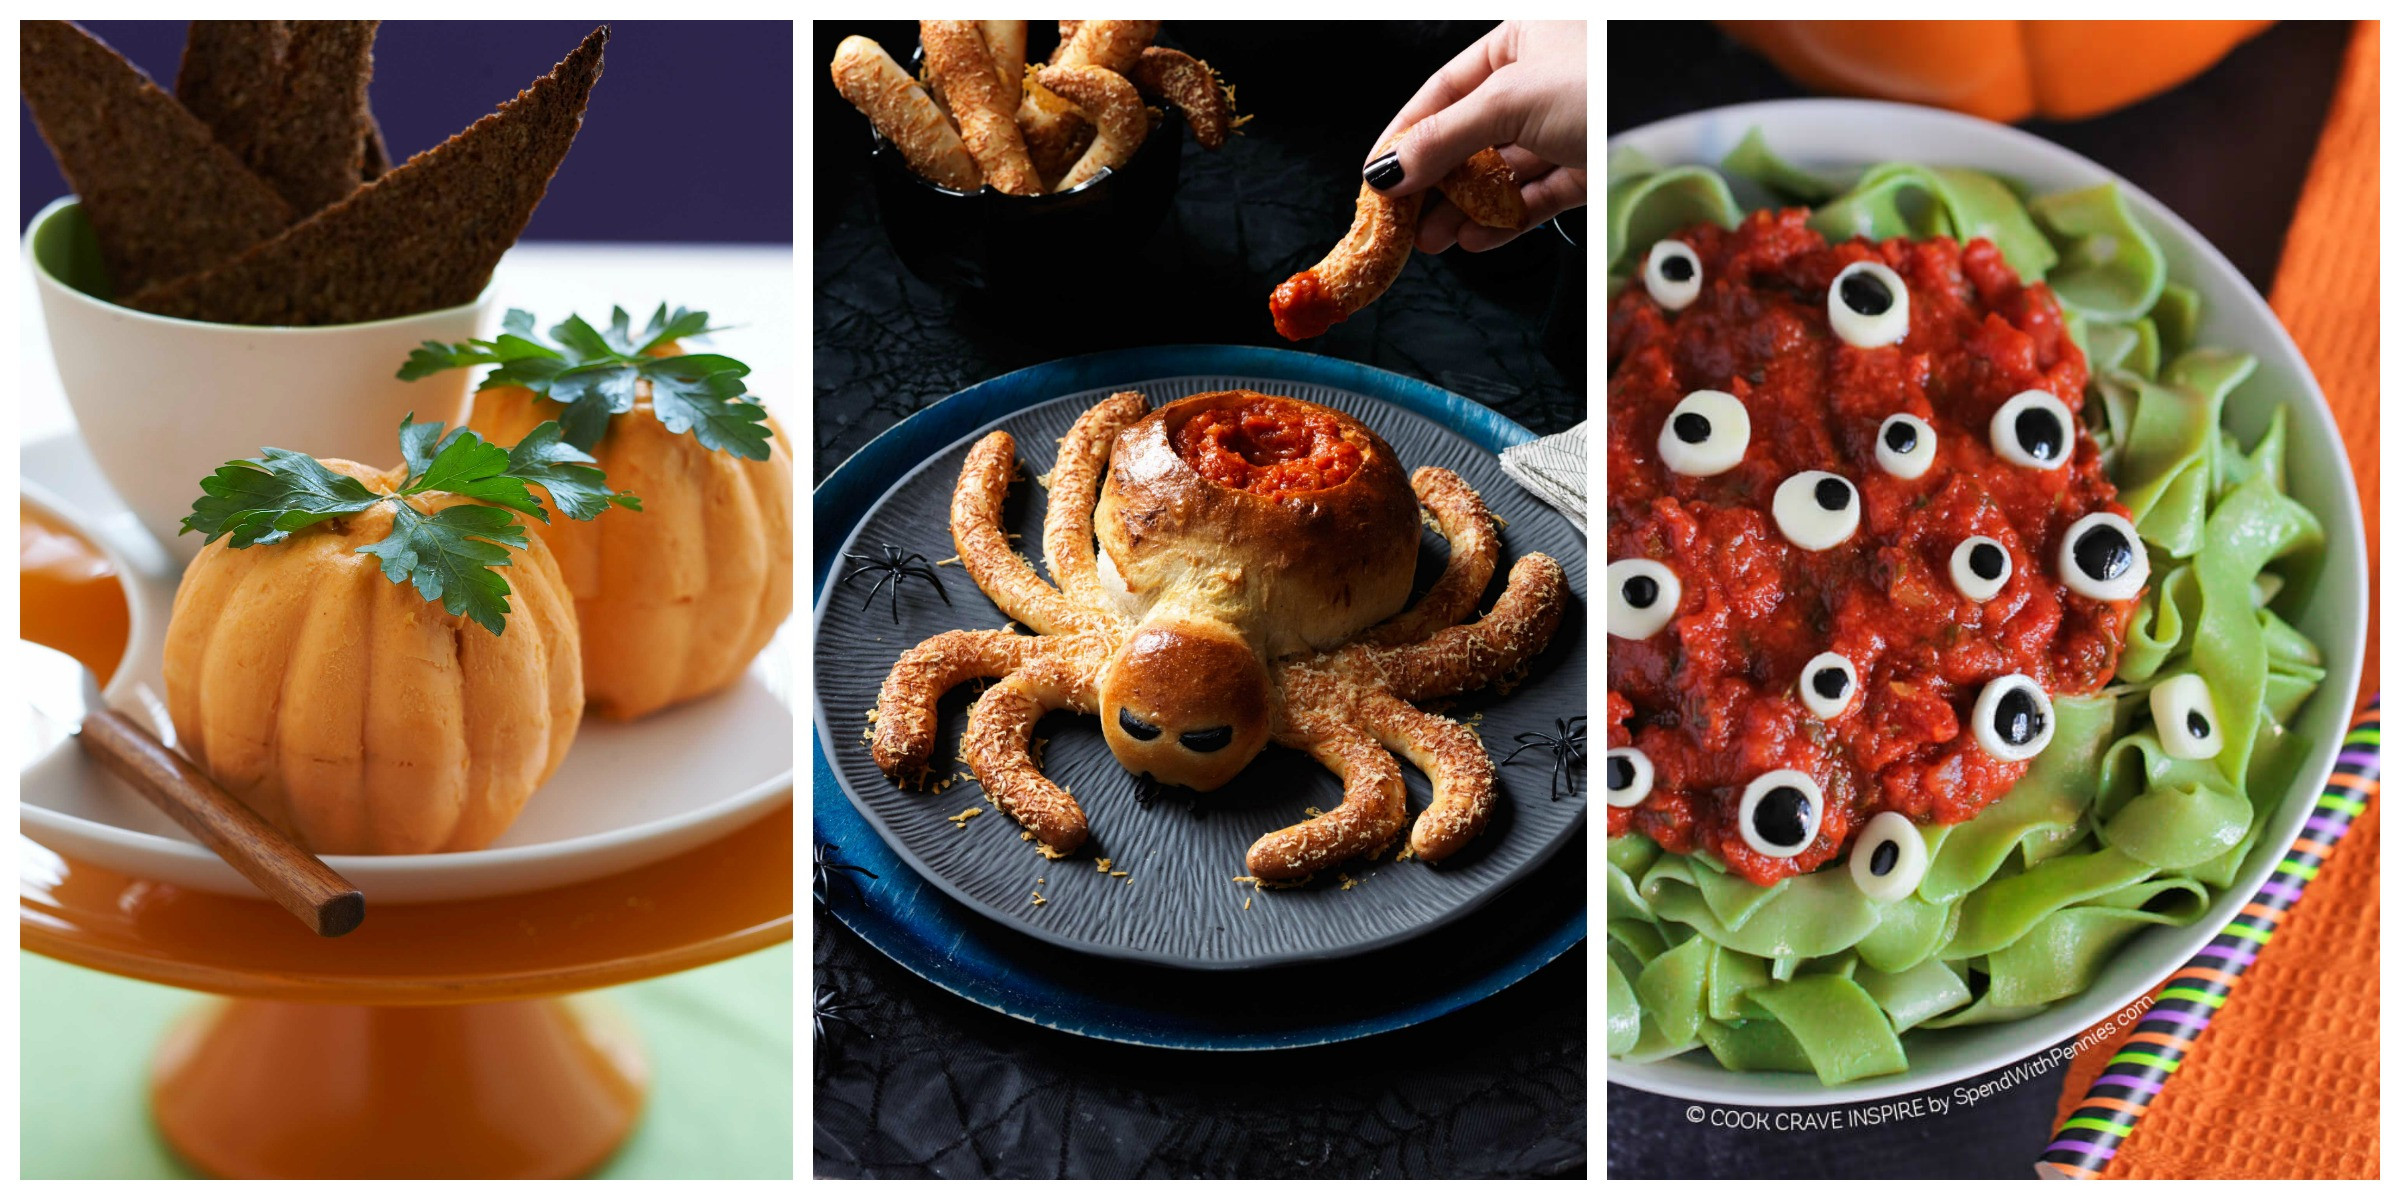 Halloween Main Dishes Recipes
 25 Spooky Halloween Dinner Ideas Best Recipes for